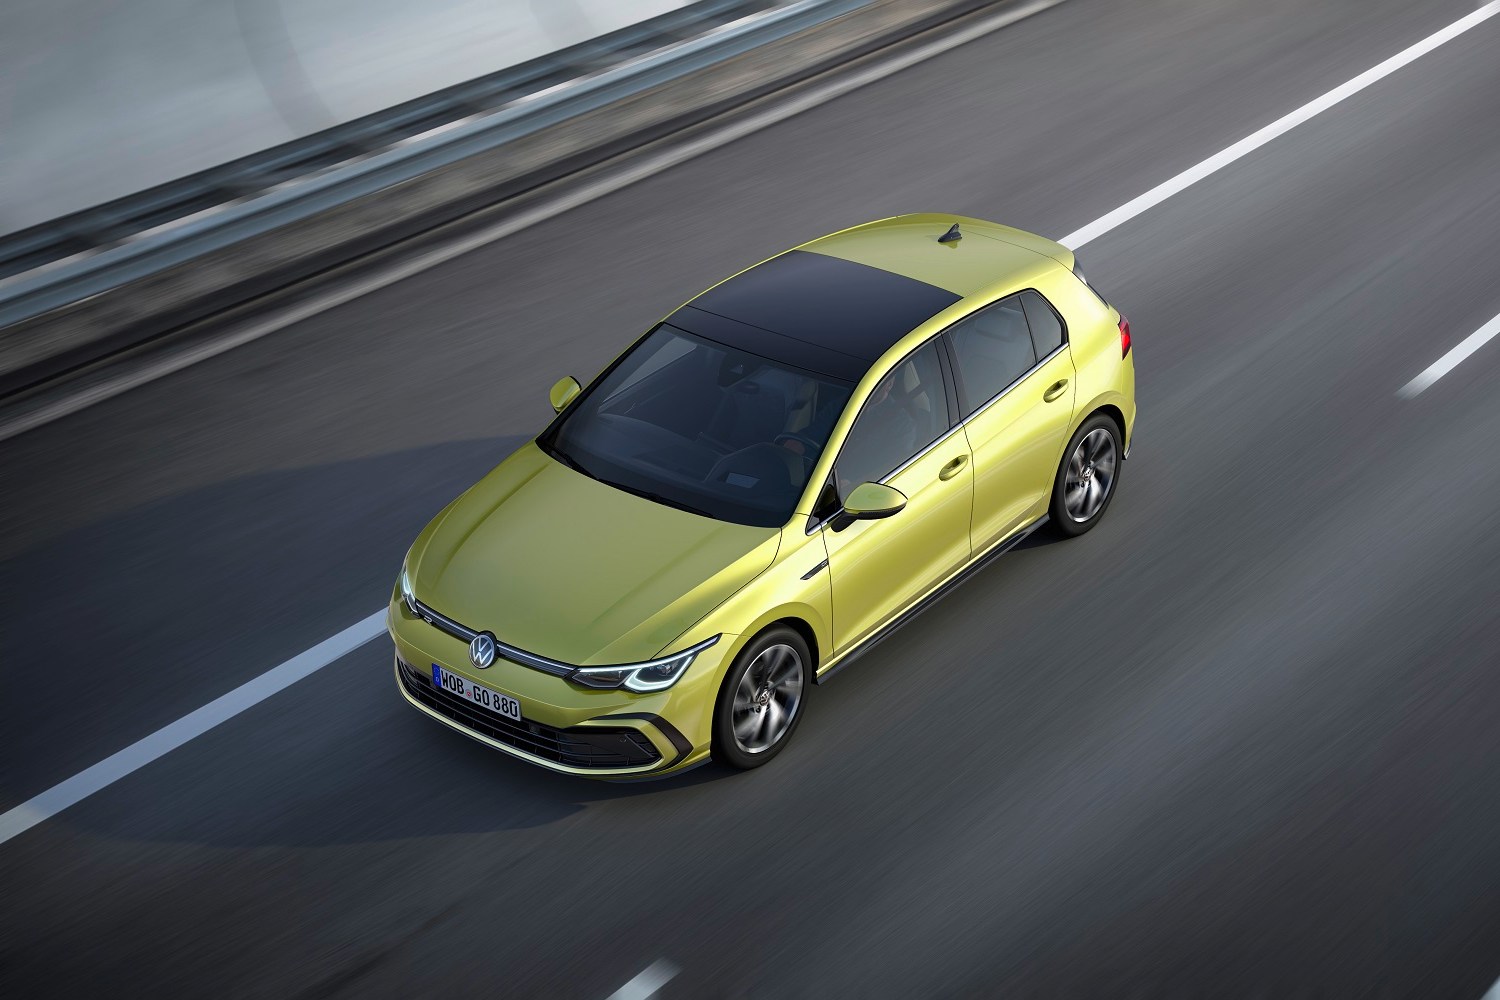 2020 Volkswagen Golf: This Is It, The All-New 8th Gen Model (Updated)